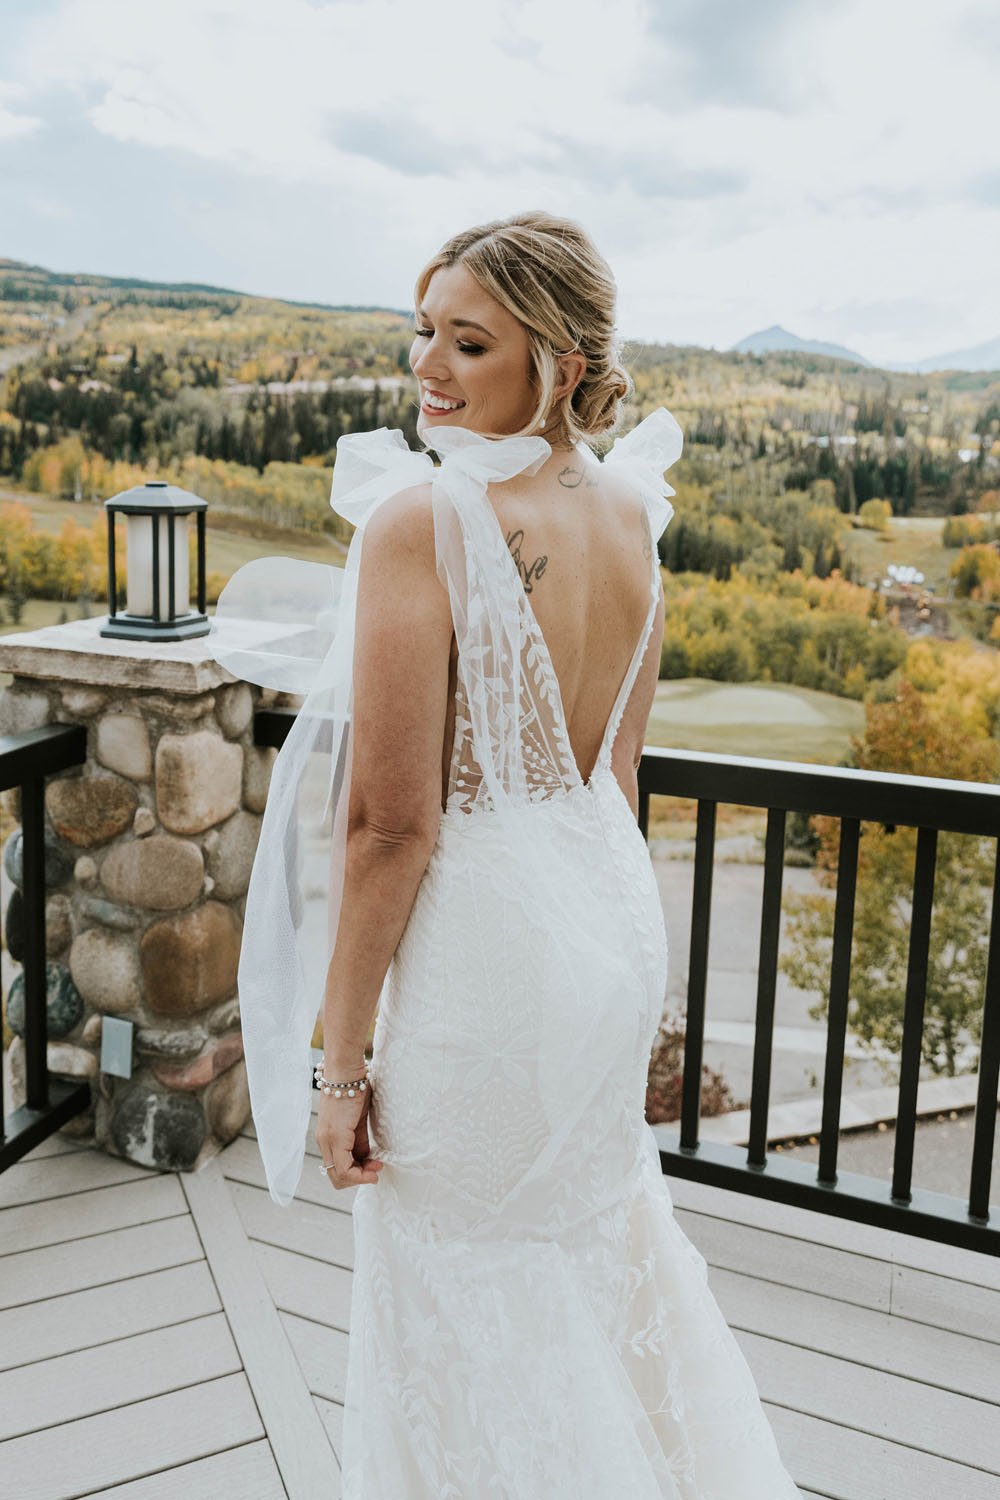  a bride looking over her shoulder smiling while wearing a low v-back wedding dress with illusion lace and shoulder bows by made with love 